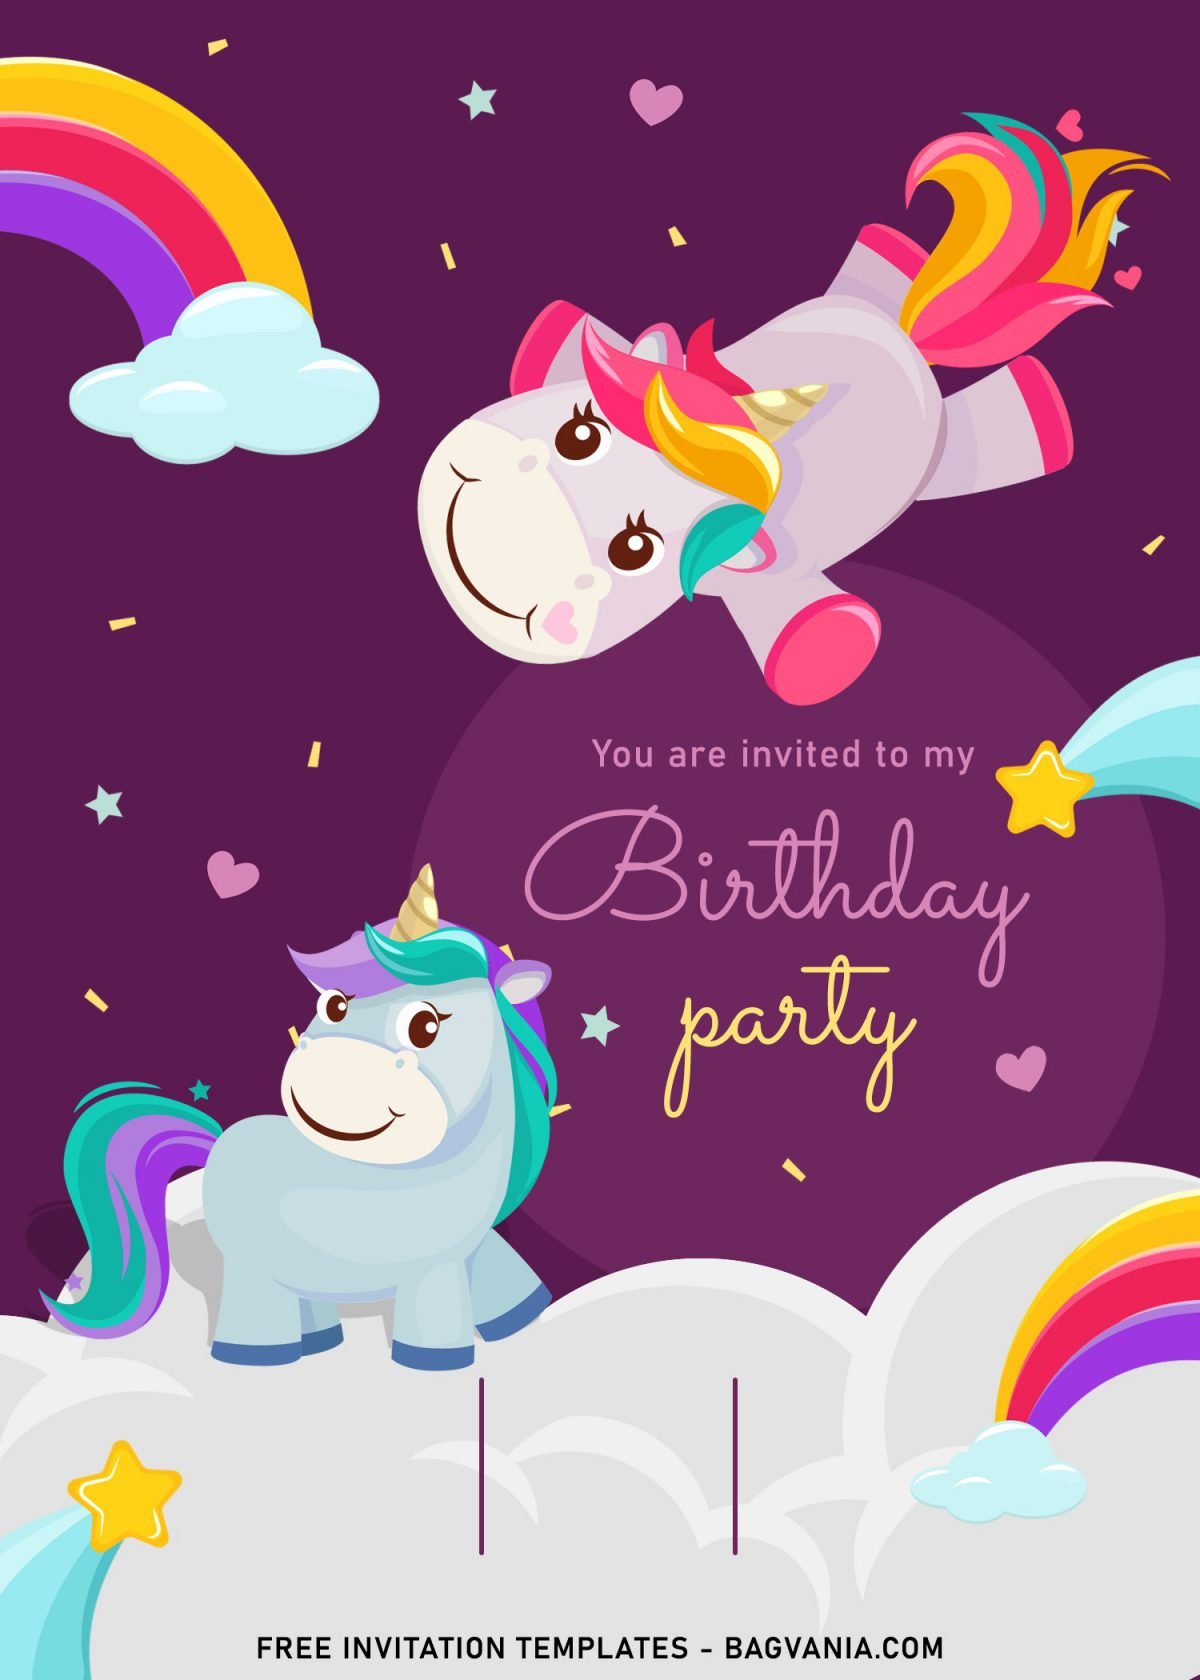 7+ Magical Rainbow Unicorn Birthday Invitation Templates For Kids Birthday Party and has White Clouds